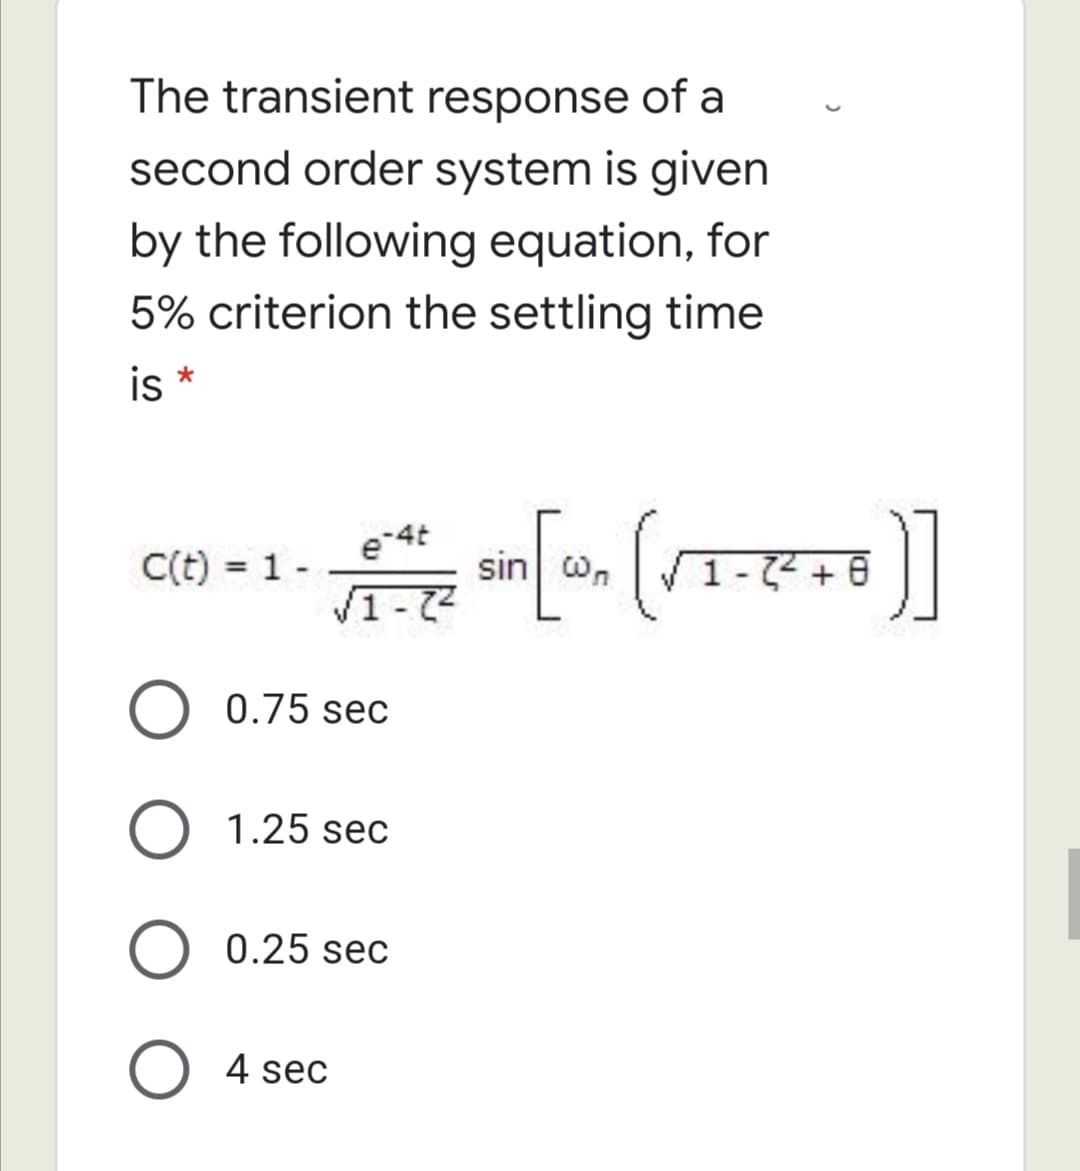 The transient response of a
second order system is given
by the following equation, for
5% criterion the settling time
is *
e-4t
C(t) = 1 -
sin on
1-72
0.75 sec
1.25 sec
O 0.25 sec
O 4 sec
